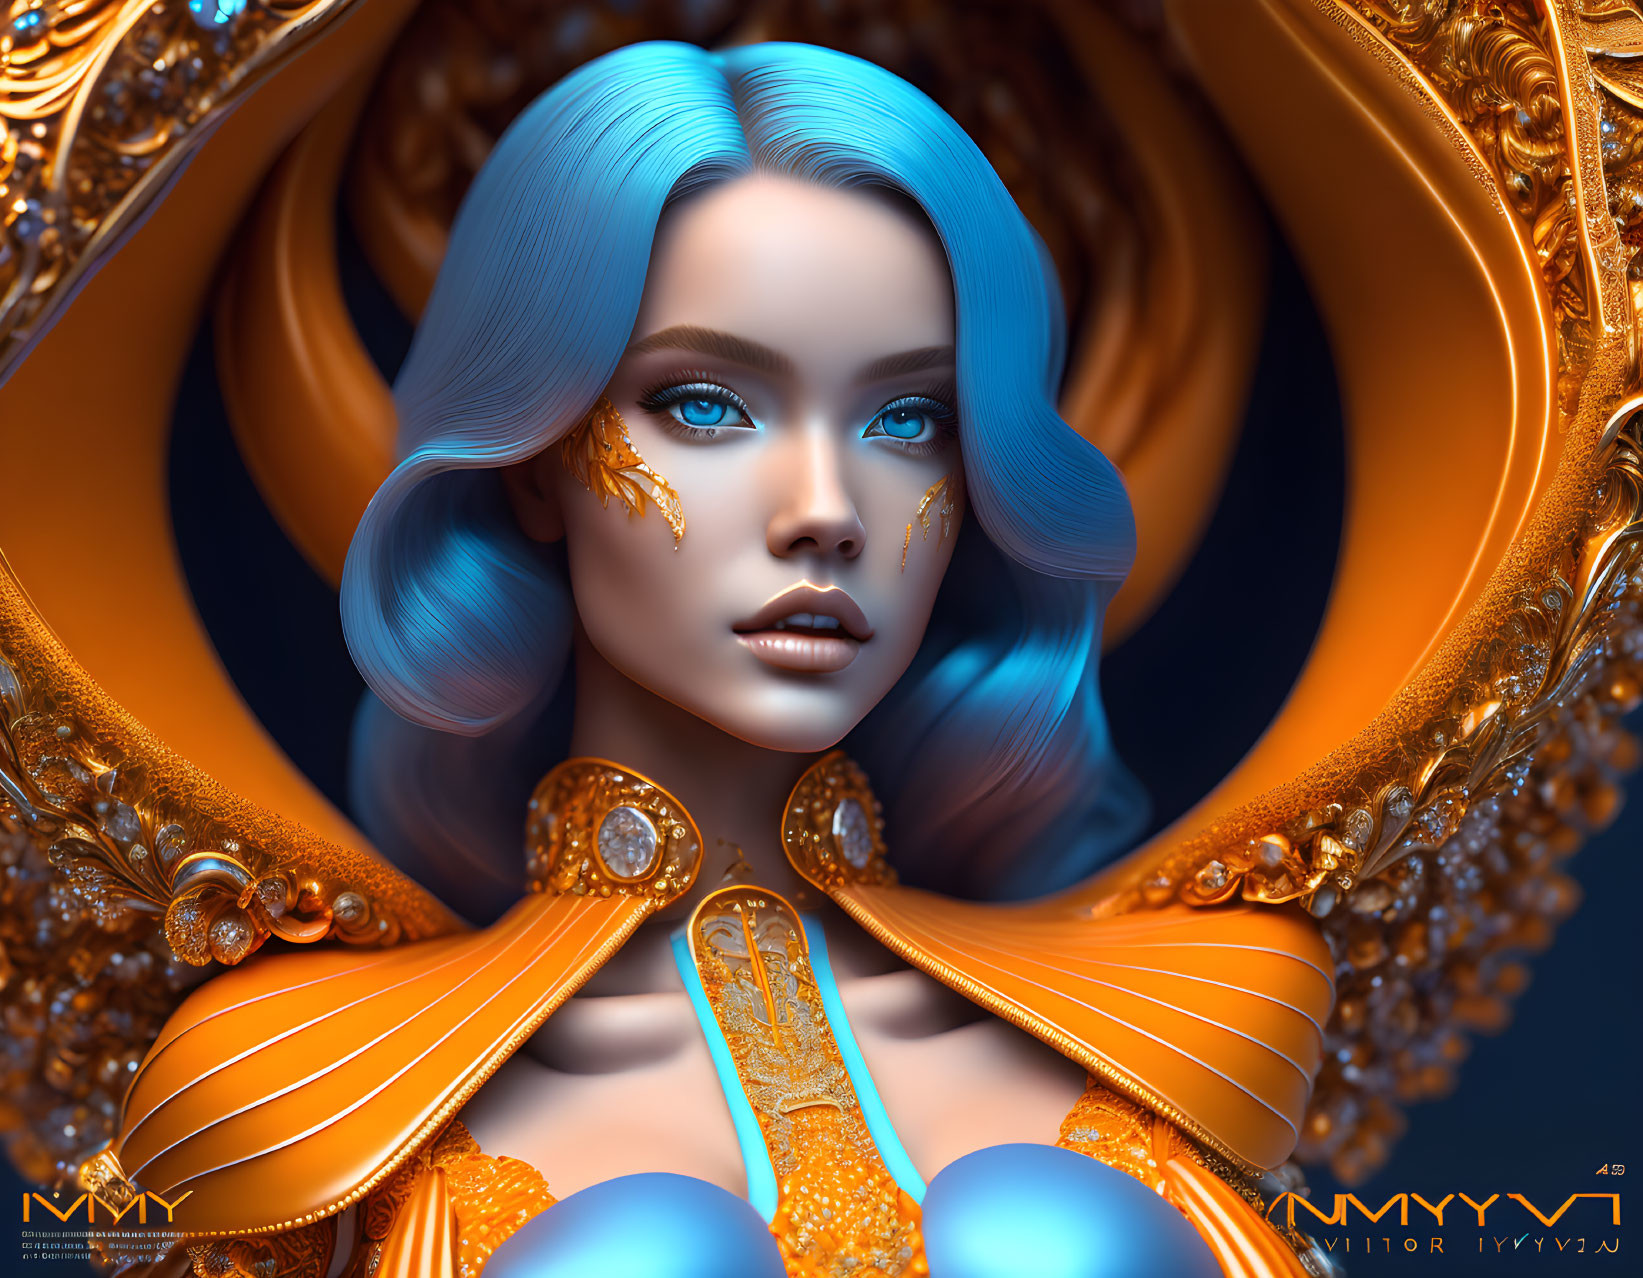 Blue-skinned woman with golden headpiece and attire in digital art.